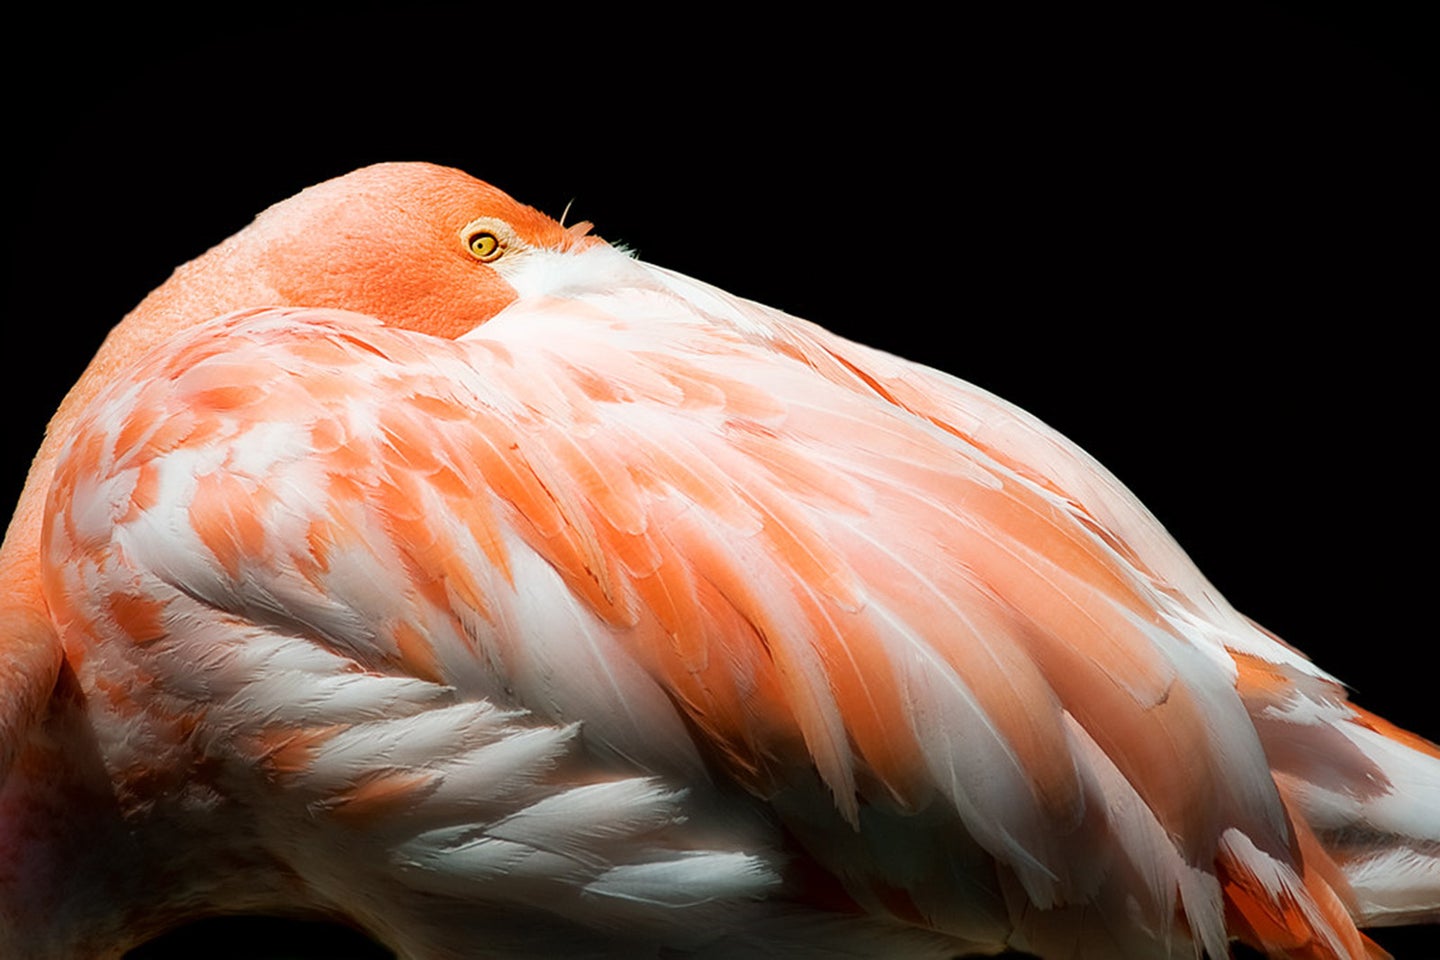 pink flamingo hiding in its wings